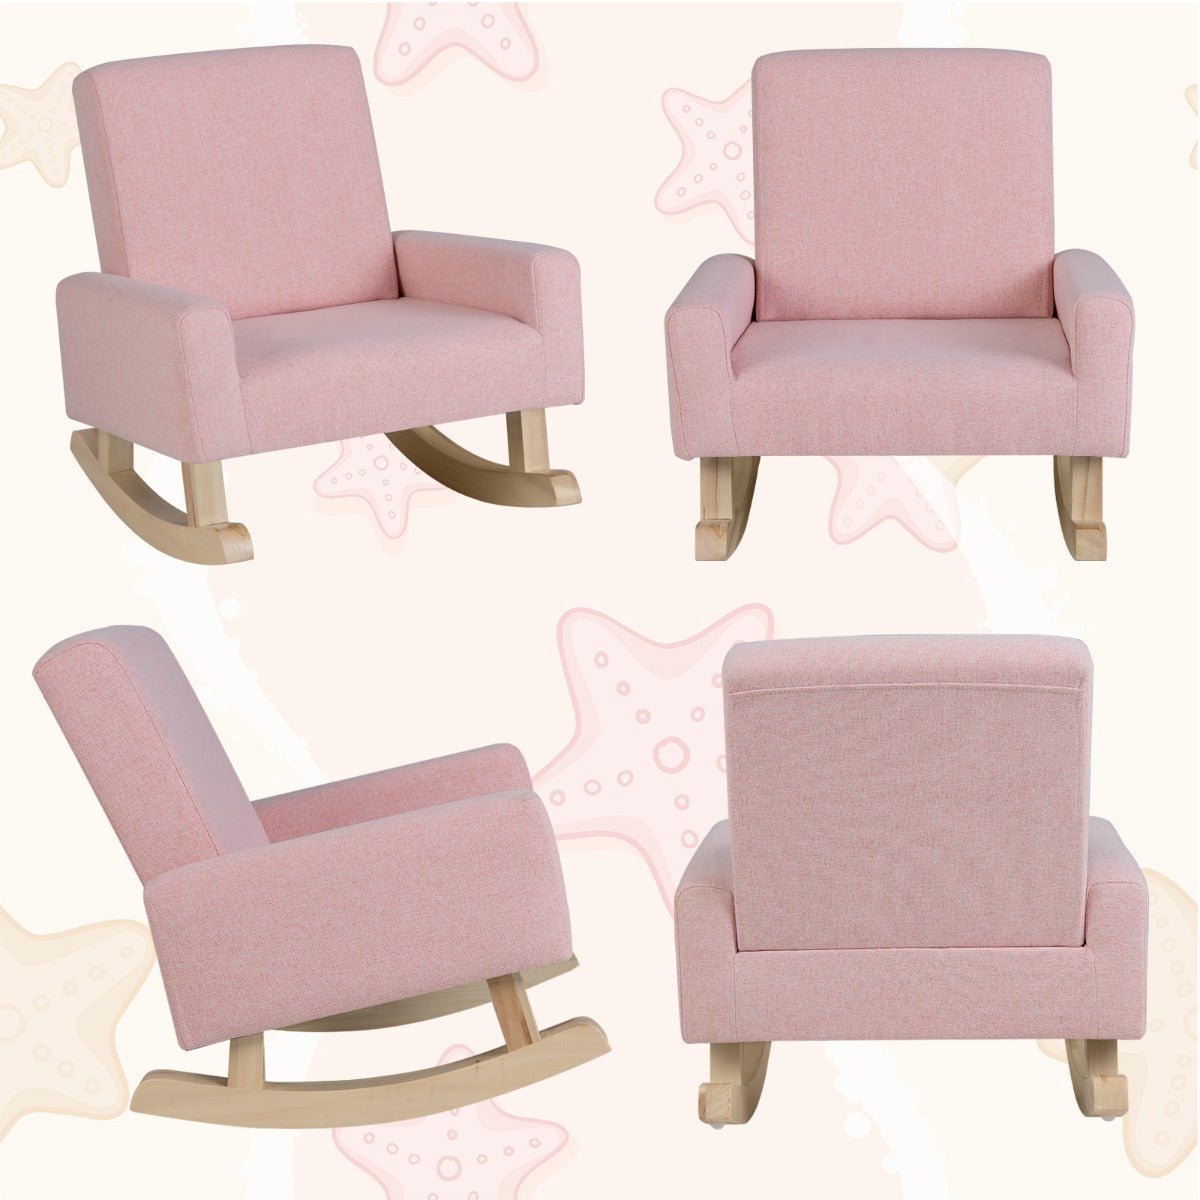 Kid-Friendly Rocking Chair - Pink, Wood Legs, Anti-tipping Design for Smiles